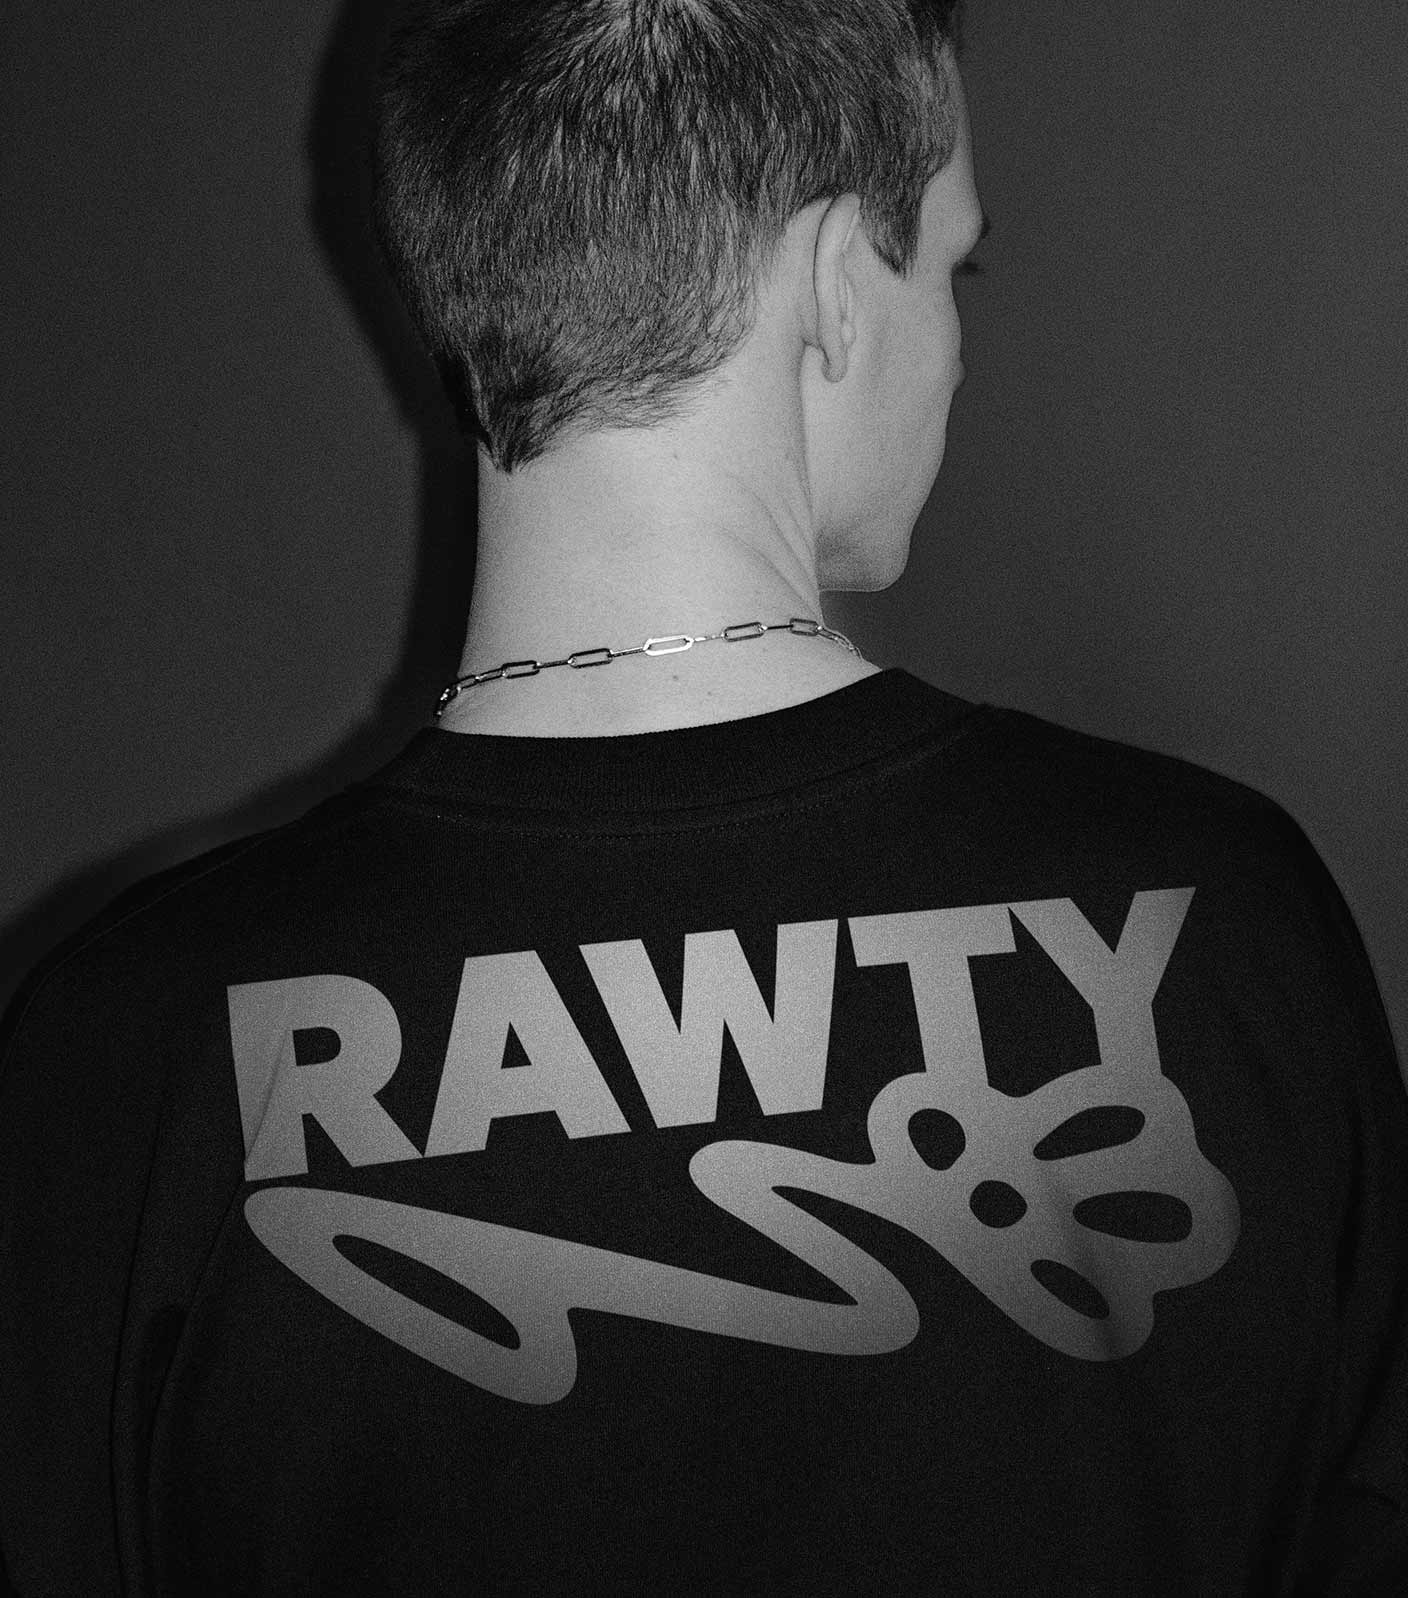 A black and white photo of person standing with the back to the camera wearing a black t-shirt with the white RAWTY logo.